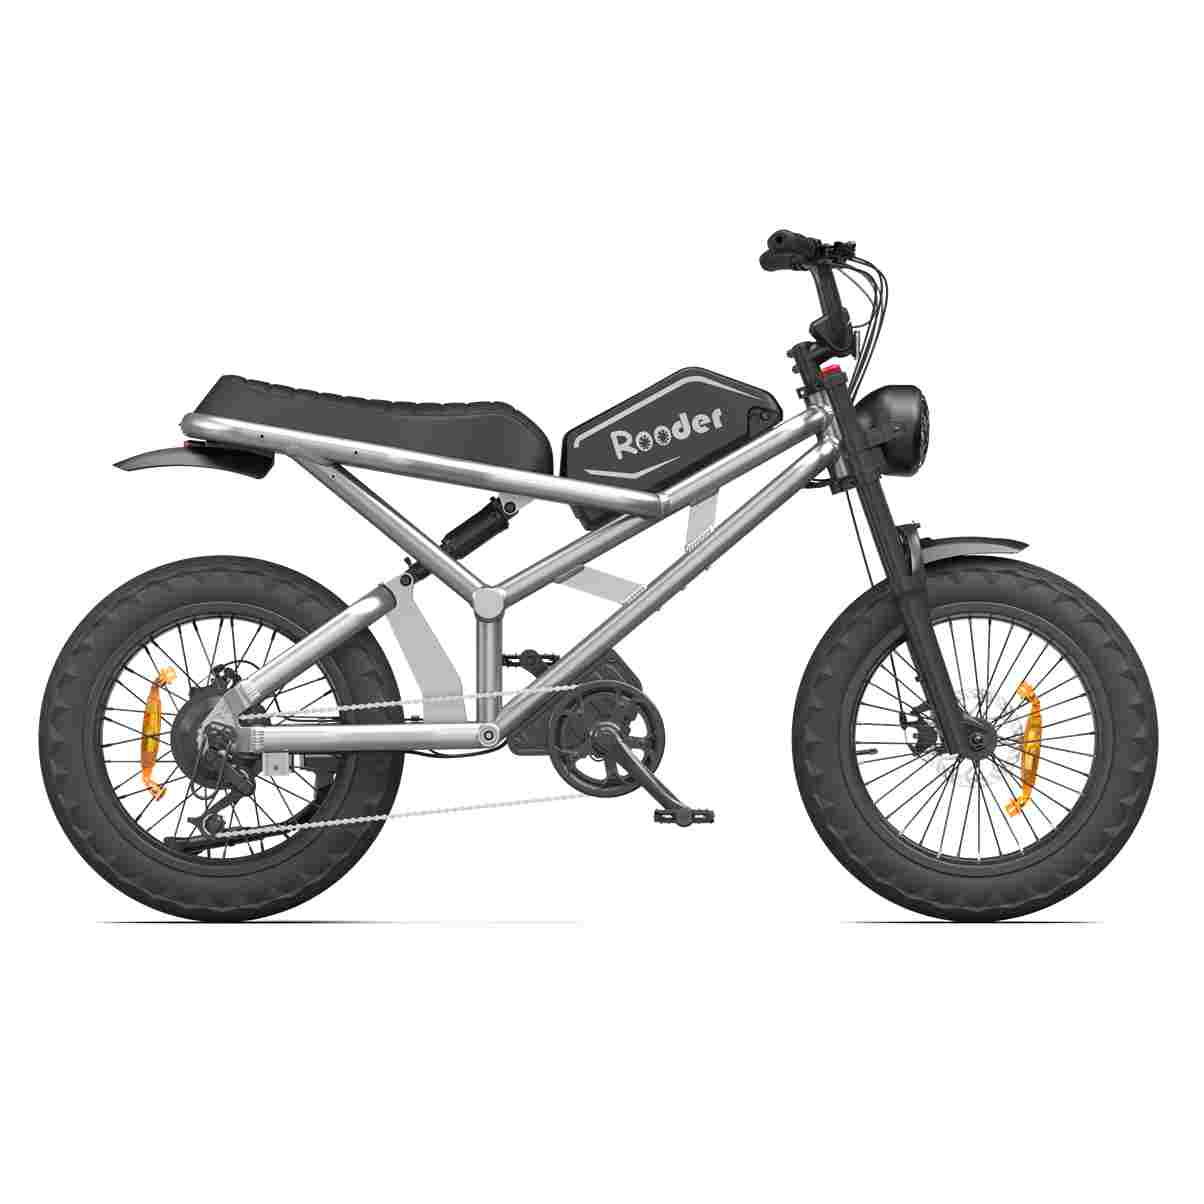 All Terrain Electric Scooter wholesale price